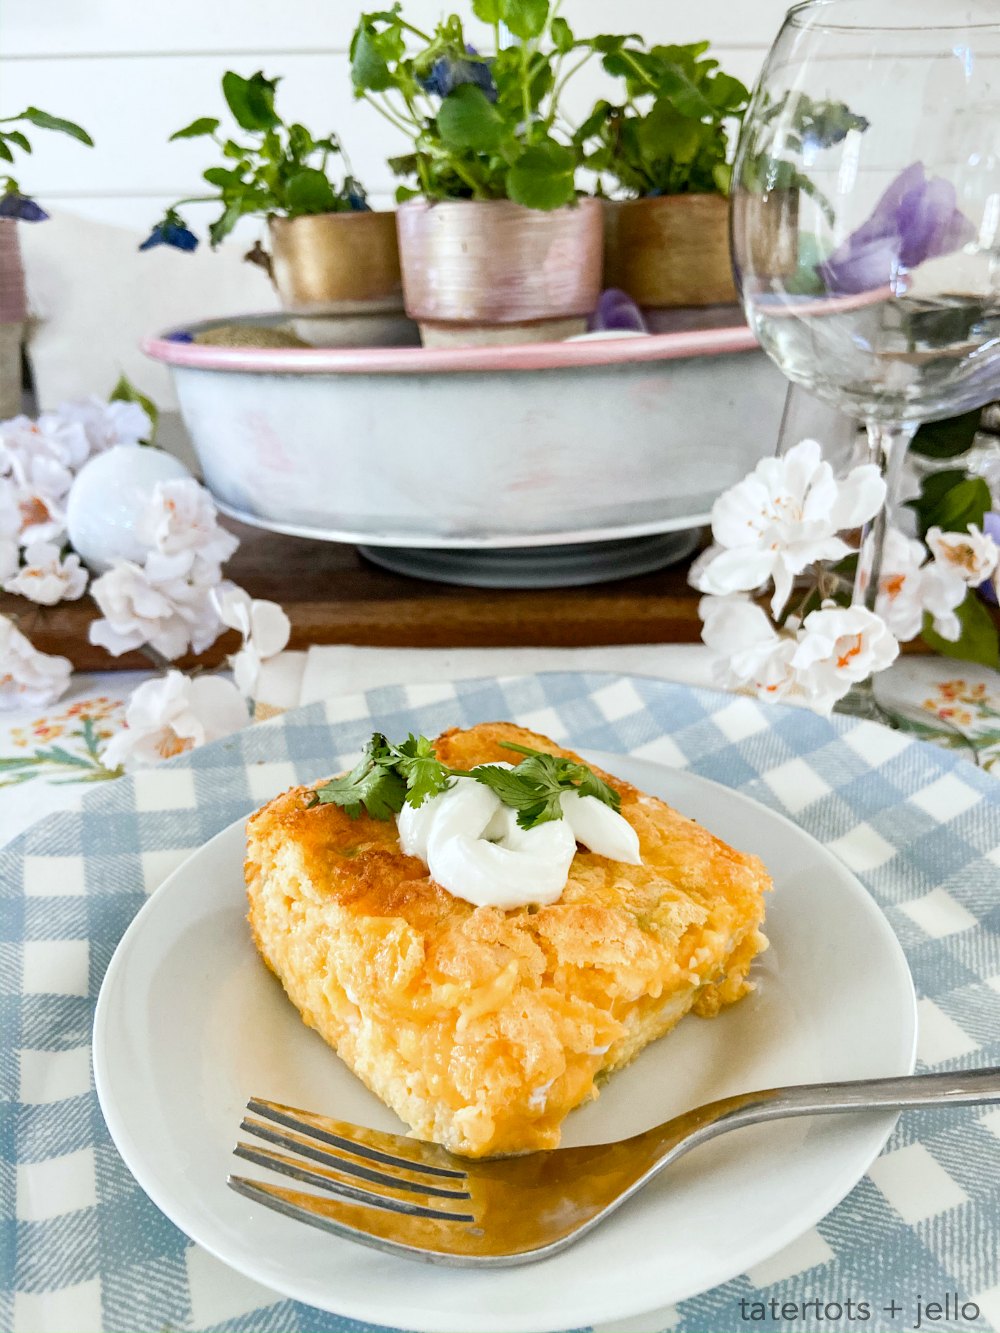 Mom’s Classic Green Chili Egg Casserole. Mom’s Classic Green Chili Egg Casserole. Whip up this classic, light and fluffy egg casserole with gooey cheese and tangy green chilies.